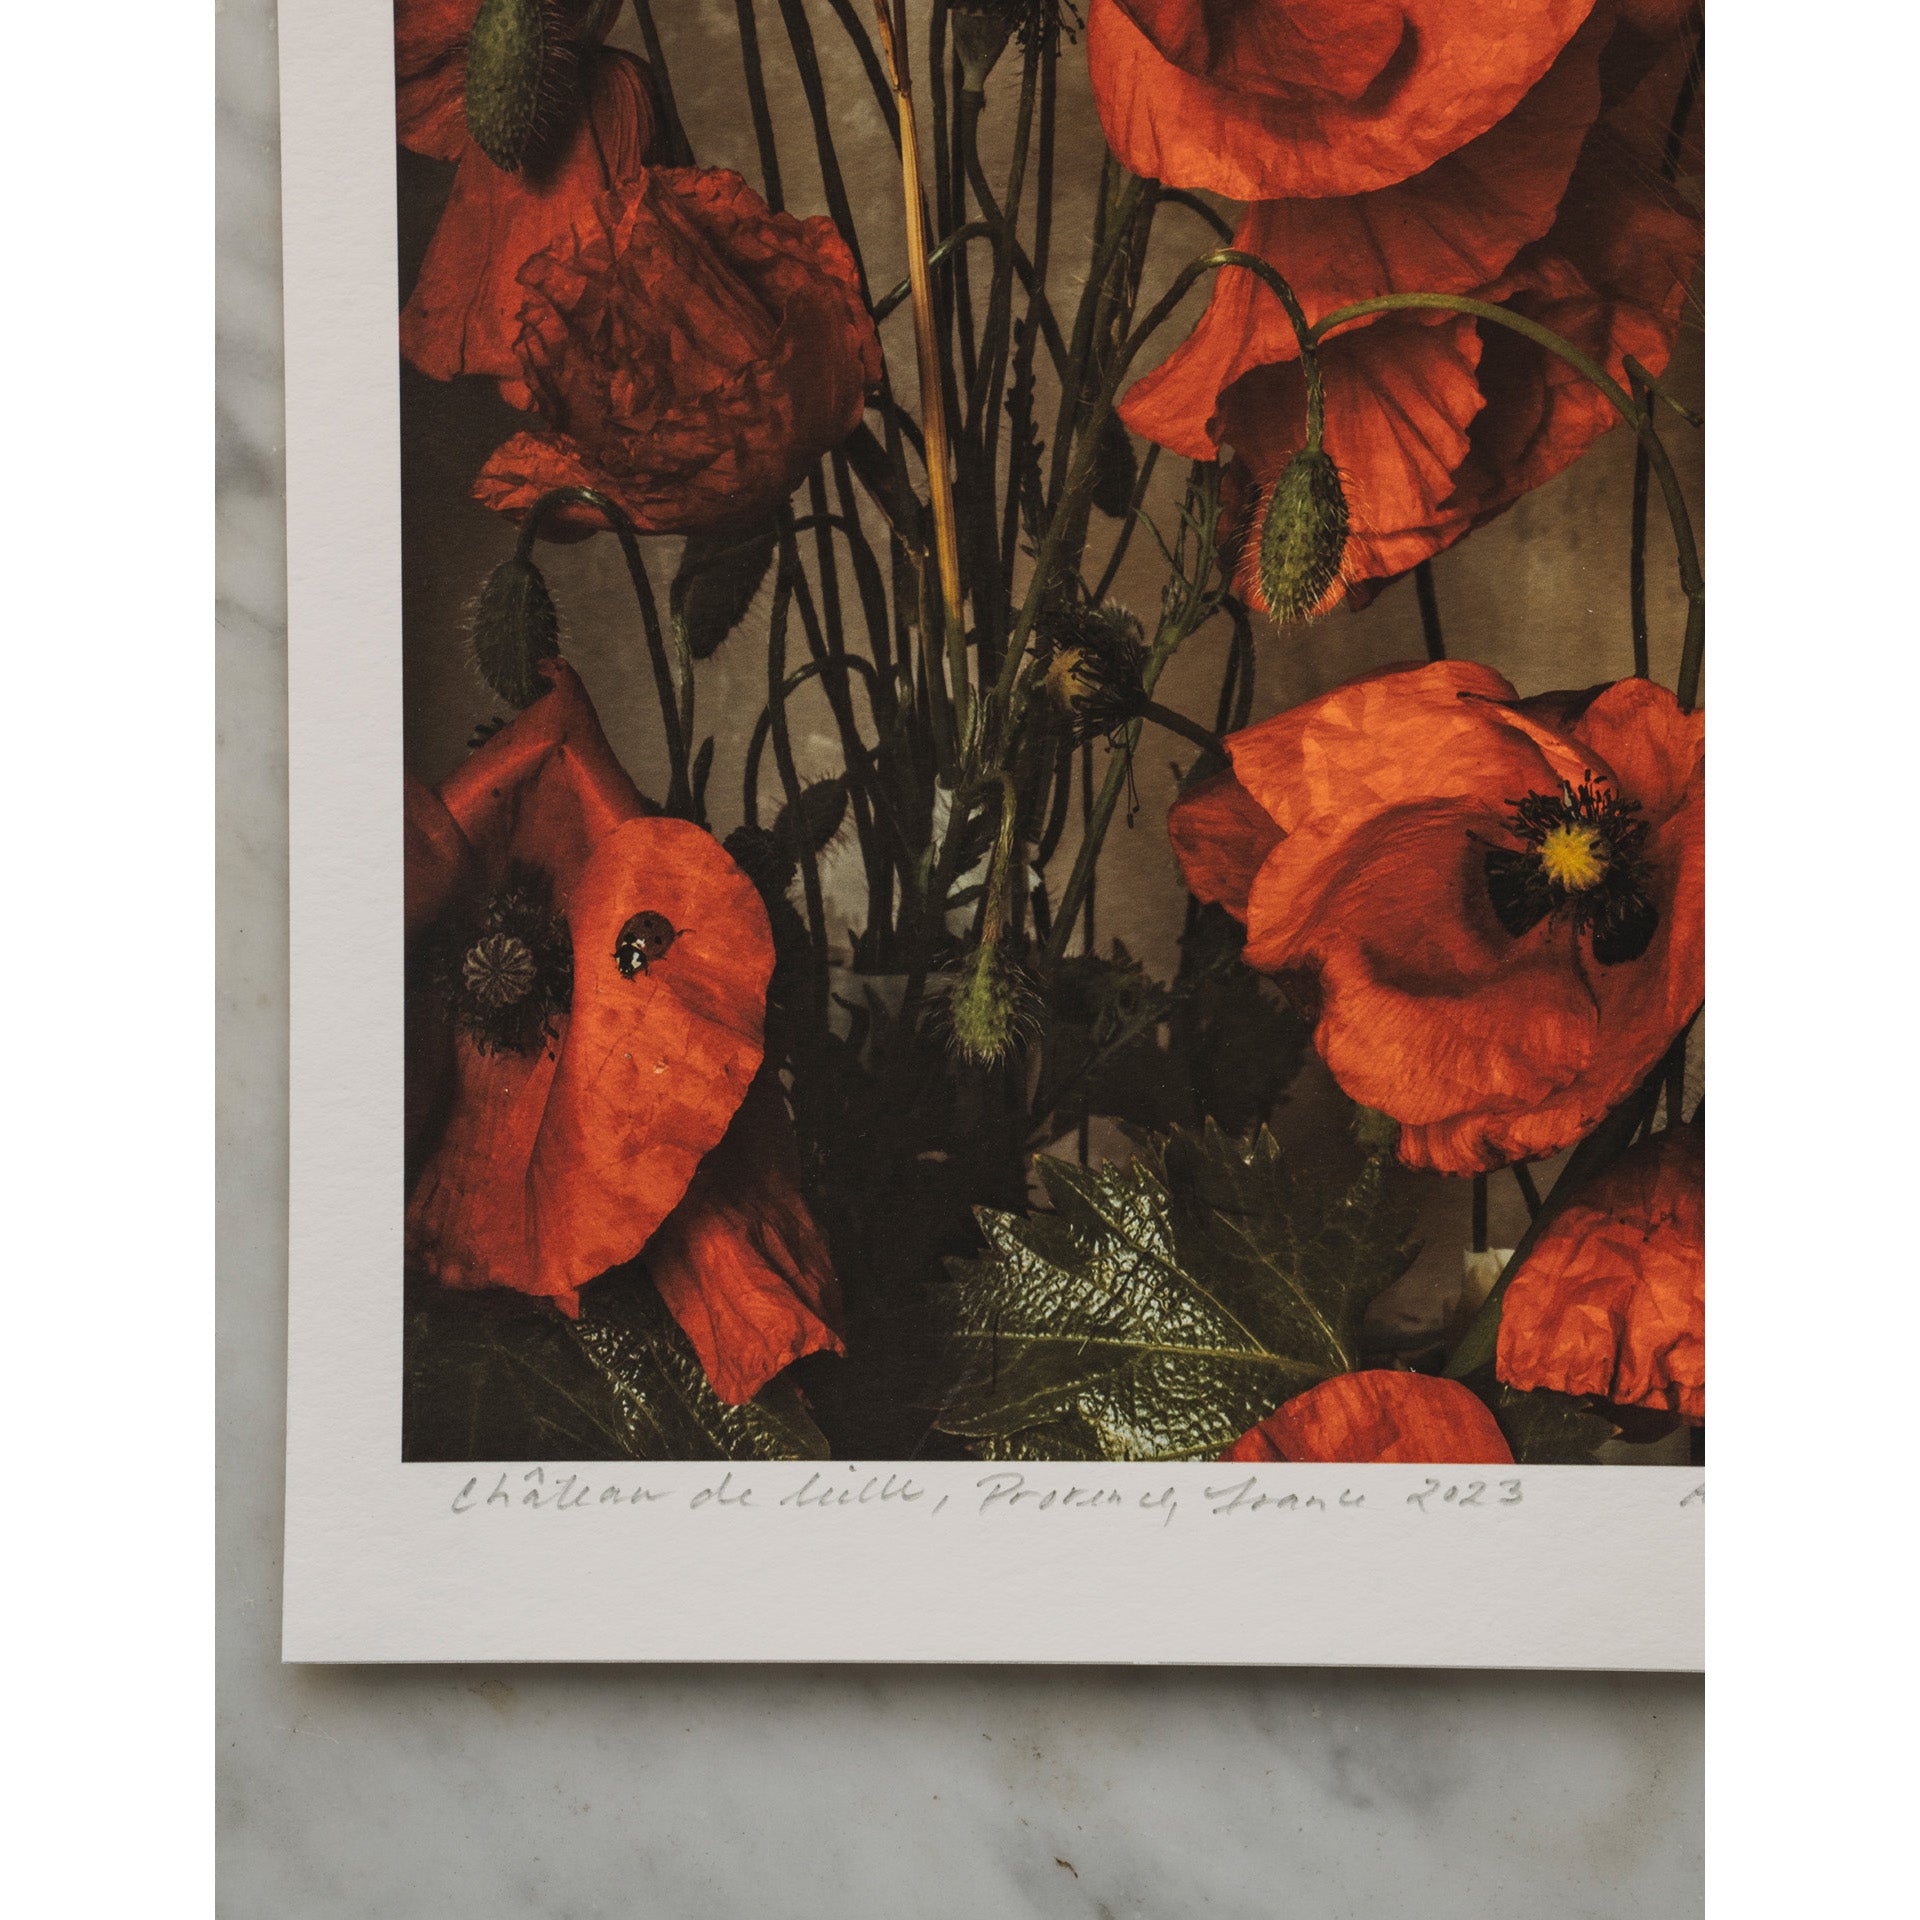 Red Poppies of May • 1 of 1 signed Artist Proof